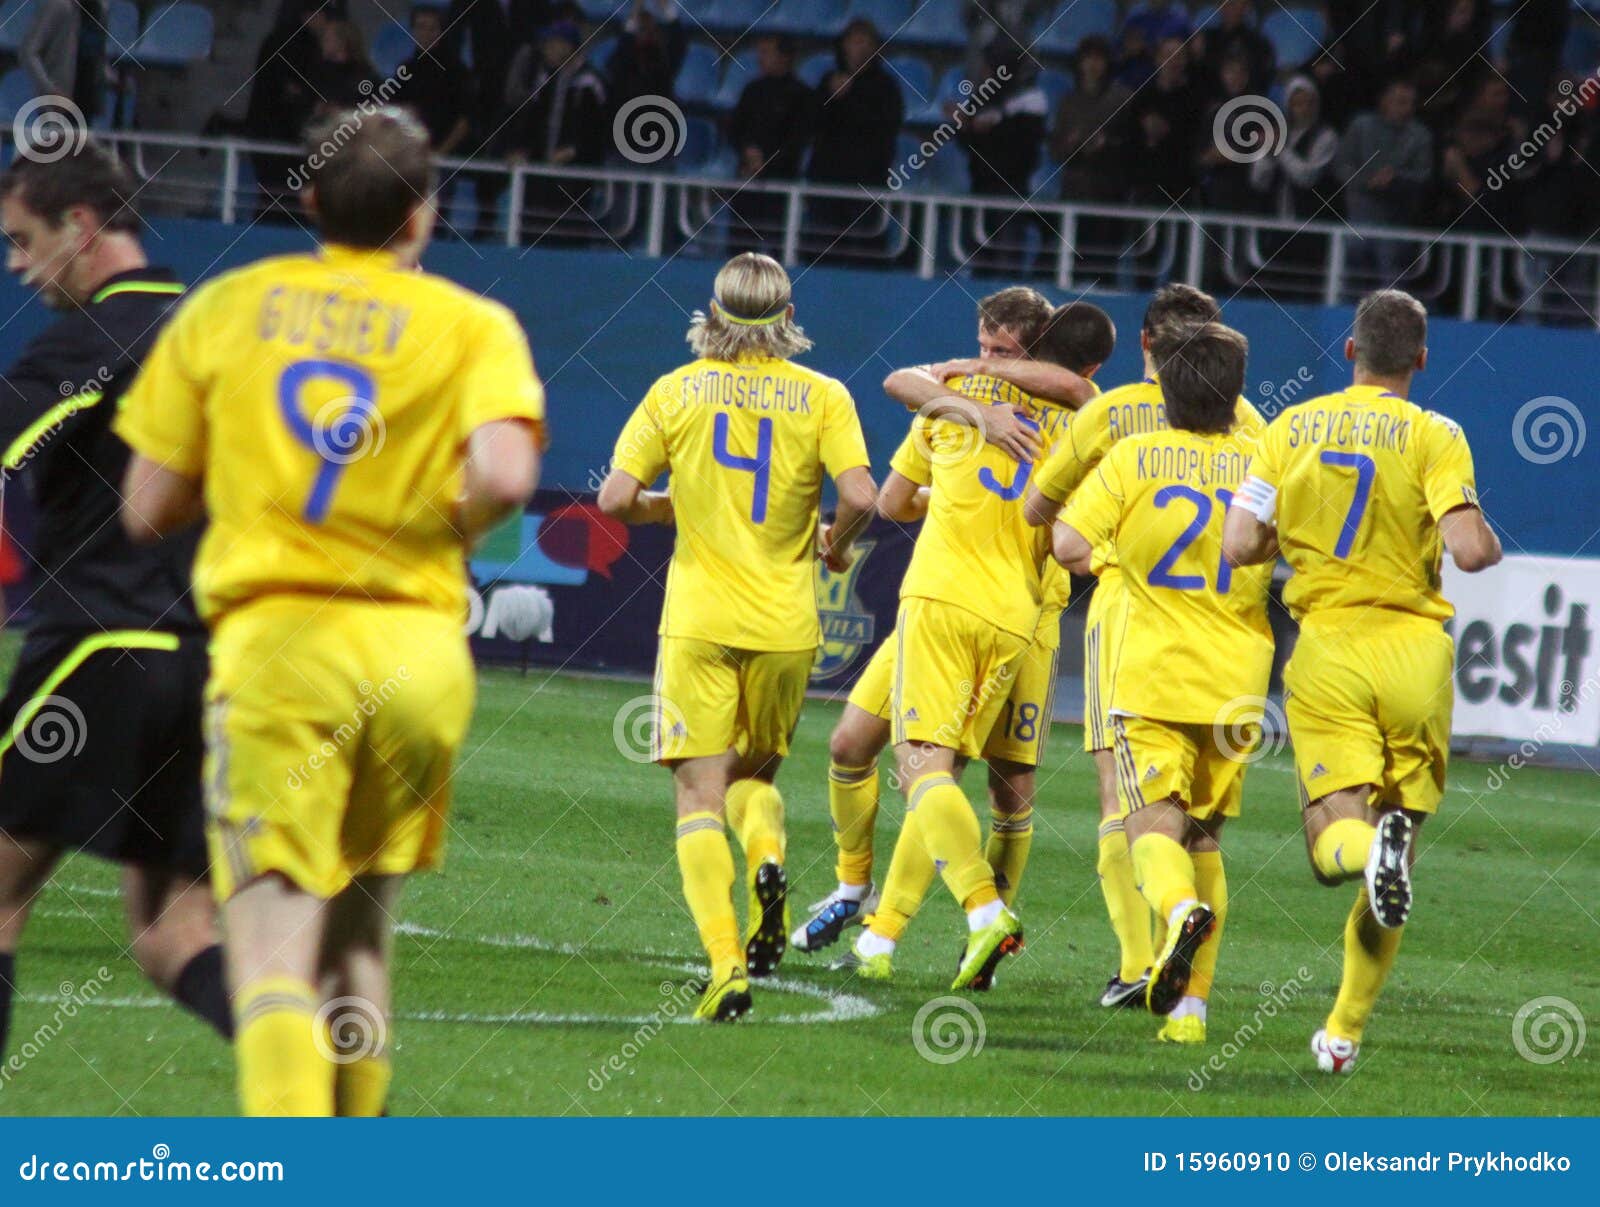 Players of Ukraine National Soccer Team Editorial Image - Image of